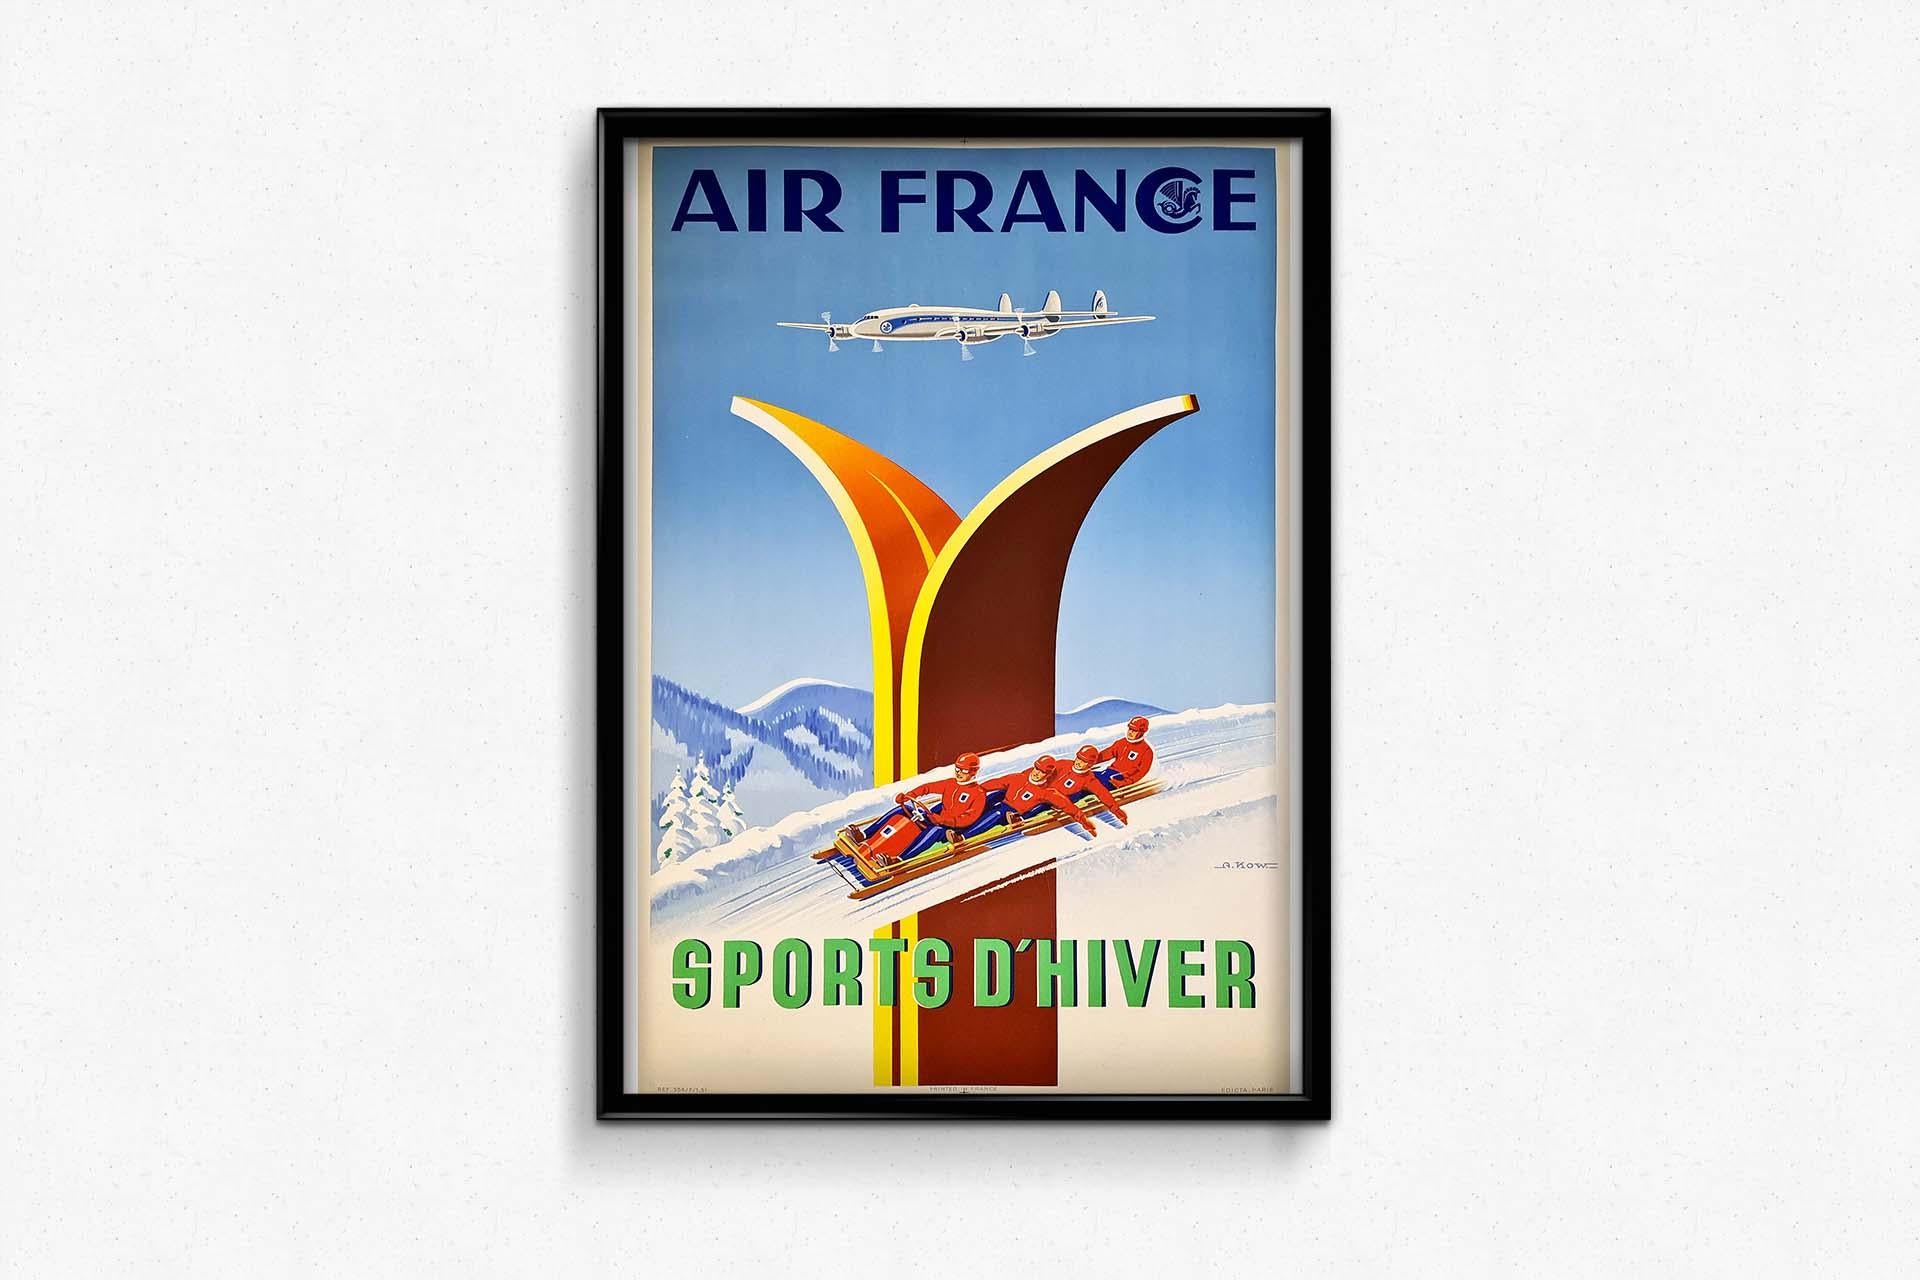 This original Air France poster from 1951 is signed by Alexis Kow and is a lithograph printed by Havas. He designed travel posters for the French Riviera, which he was personally fond of. The men's 4-man bobsled team is shown here speeding past a